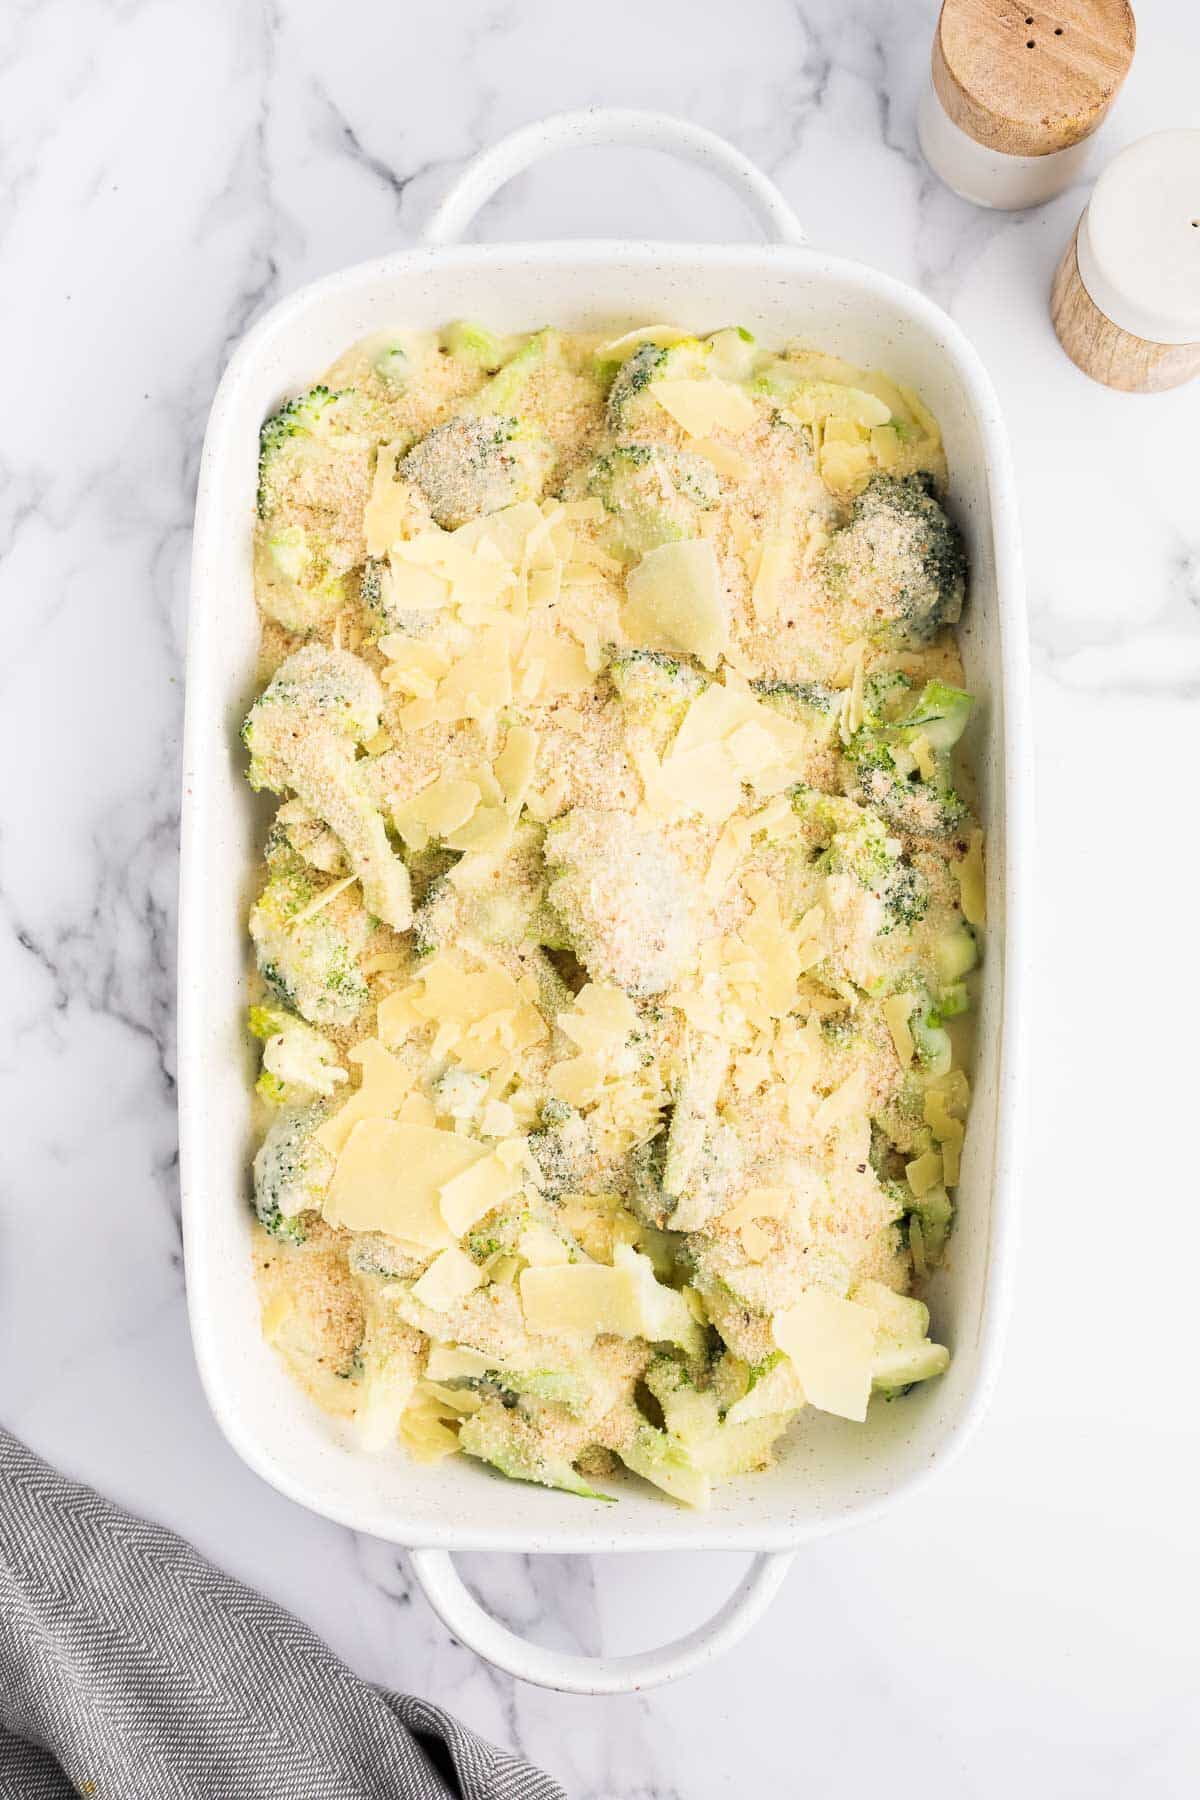 Cheesy Broccoli Au Gratin in a white casserole dish before being baked.